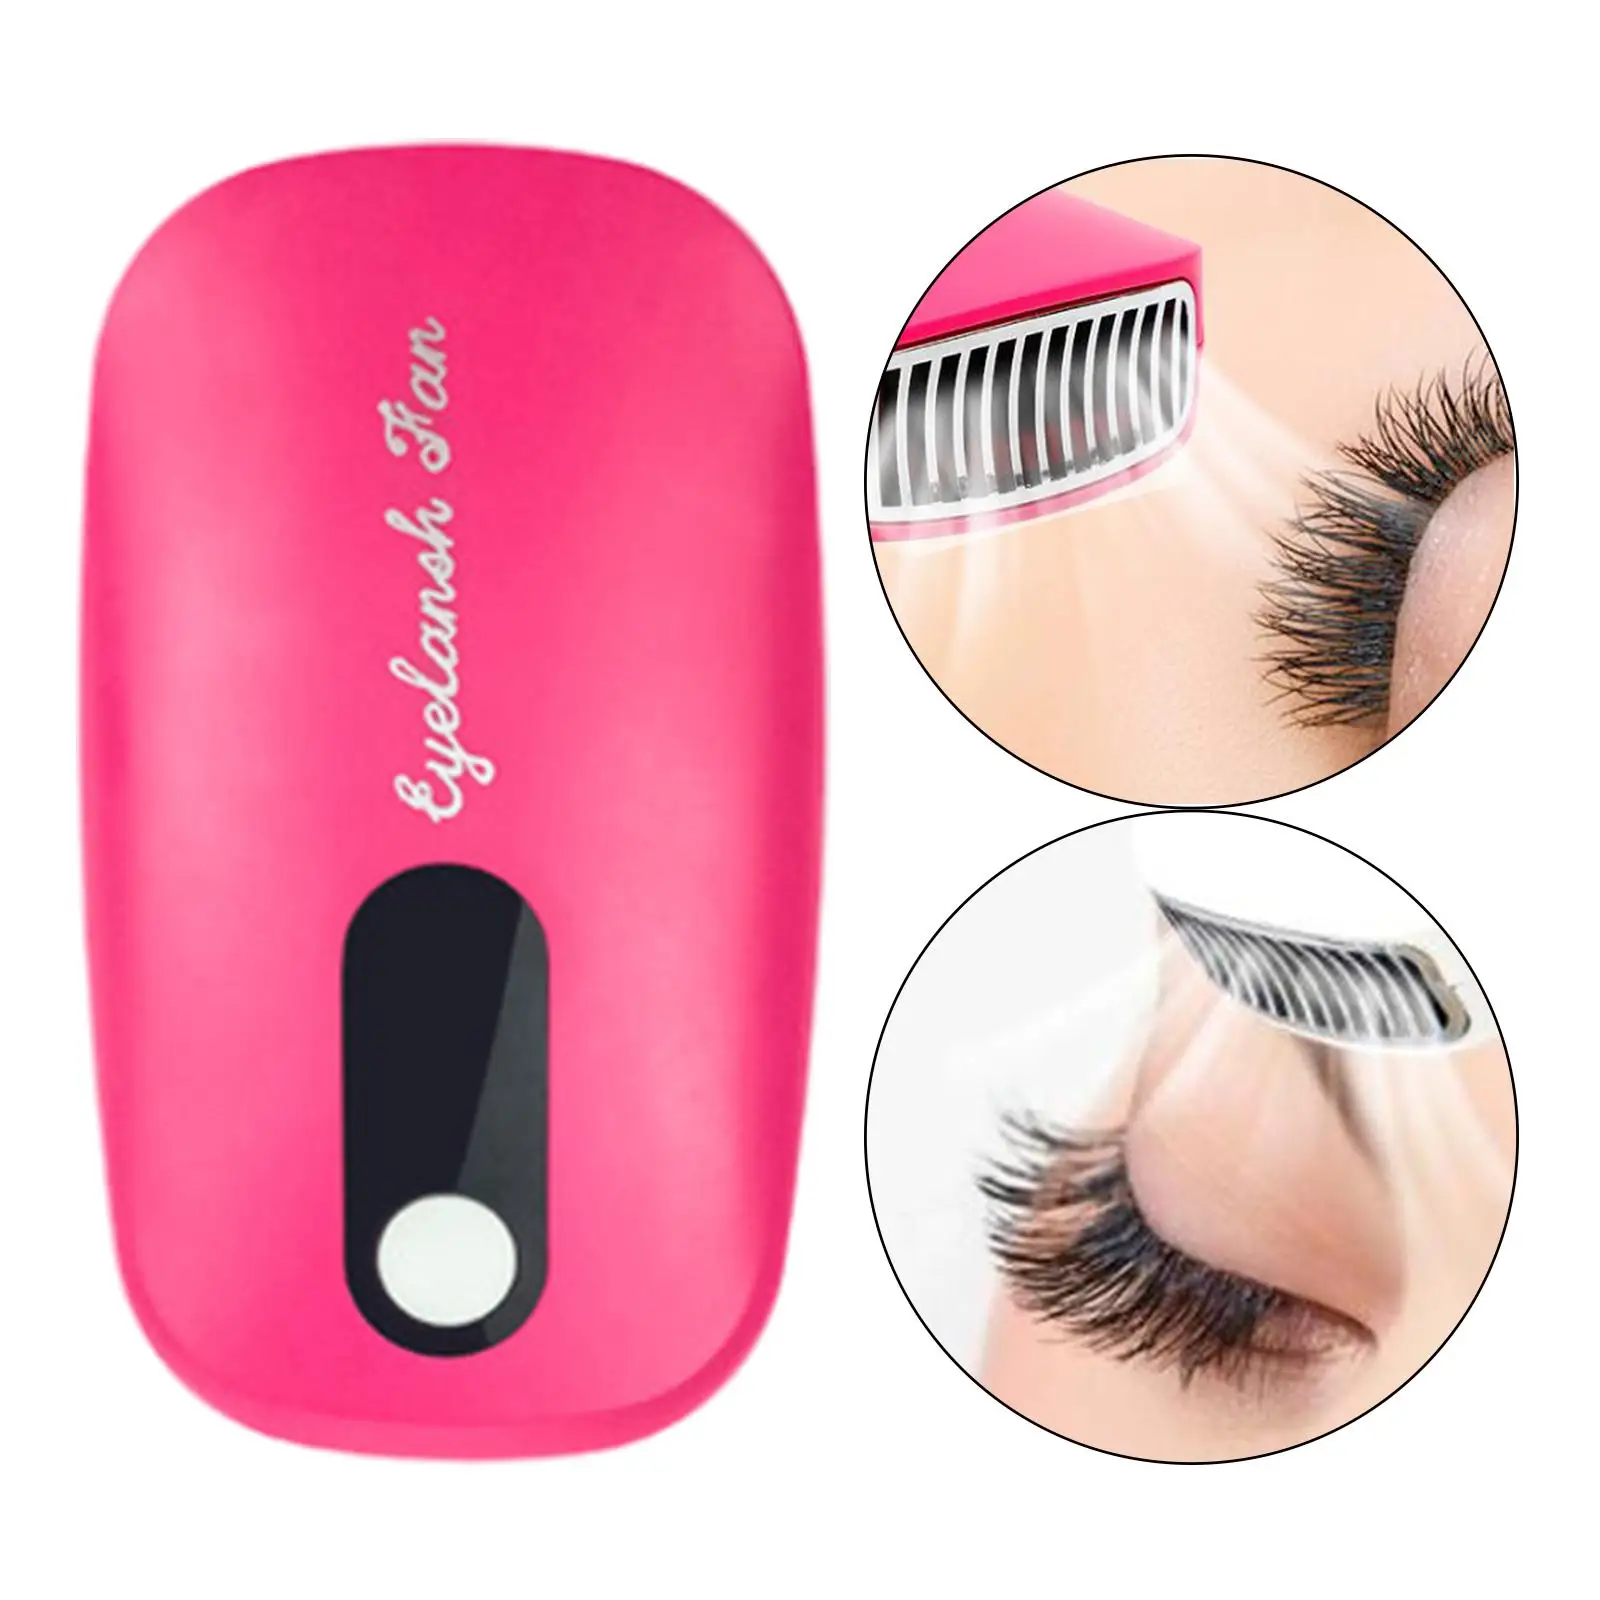 Eyelash Fan Electric Cooling Fans Mini Air Conditioning Blower for Eyelash Extension